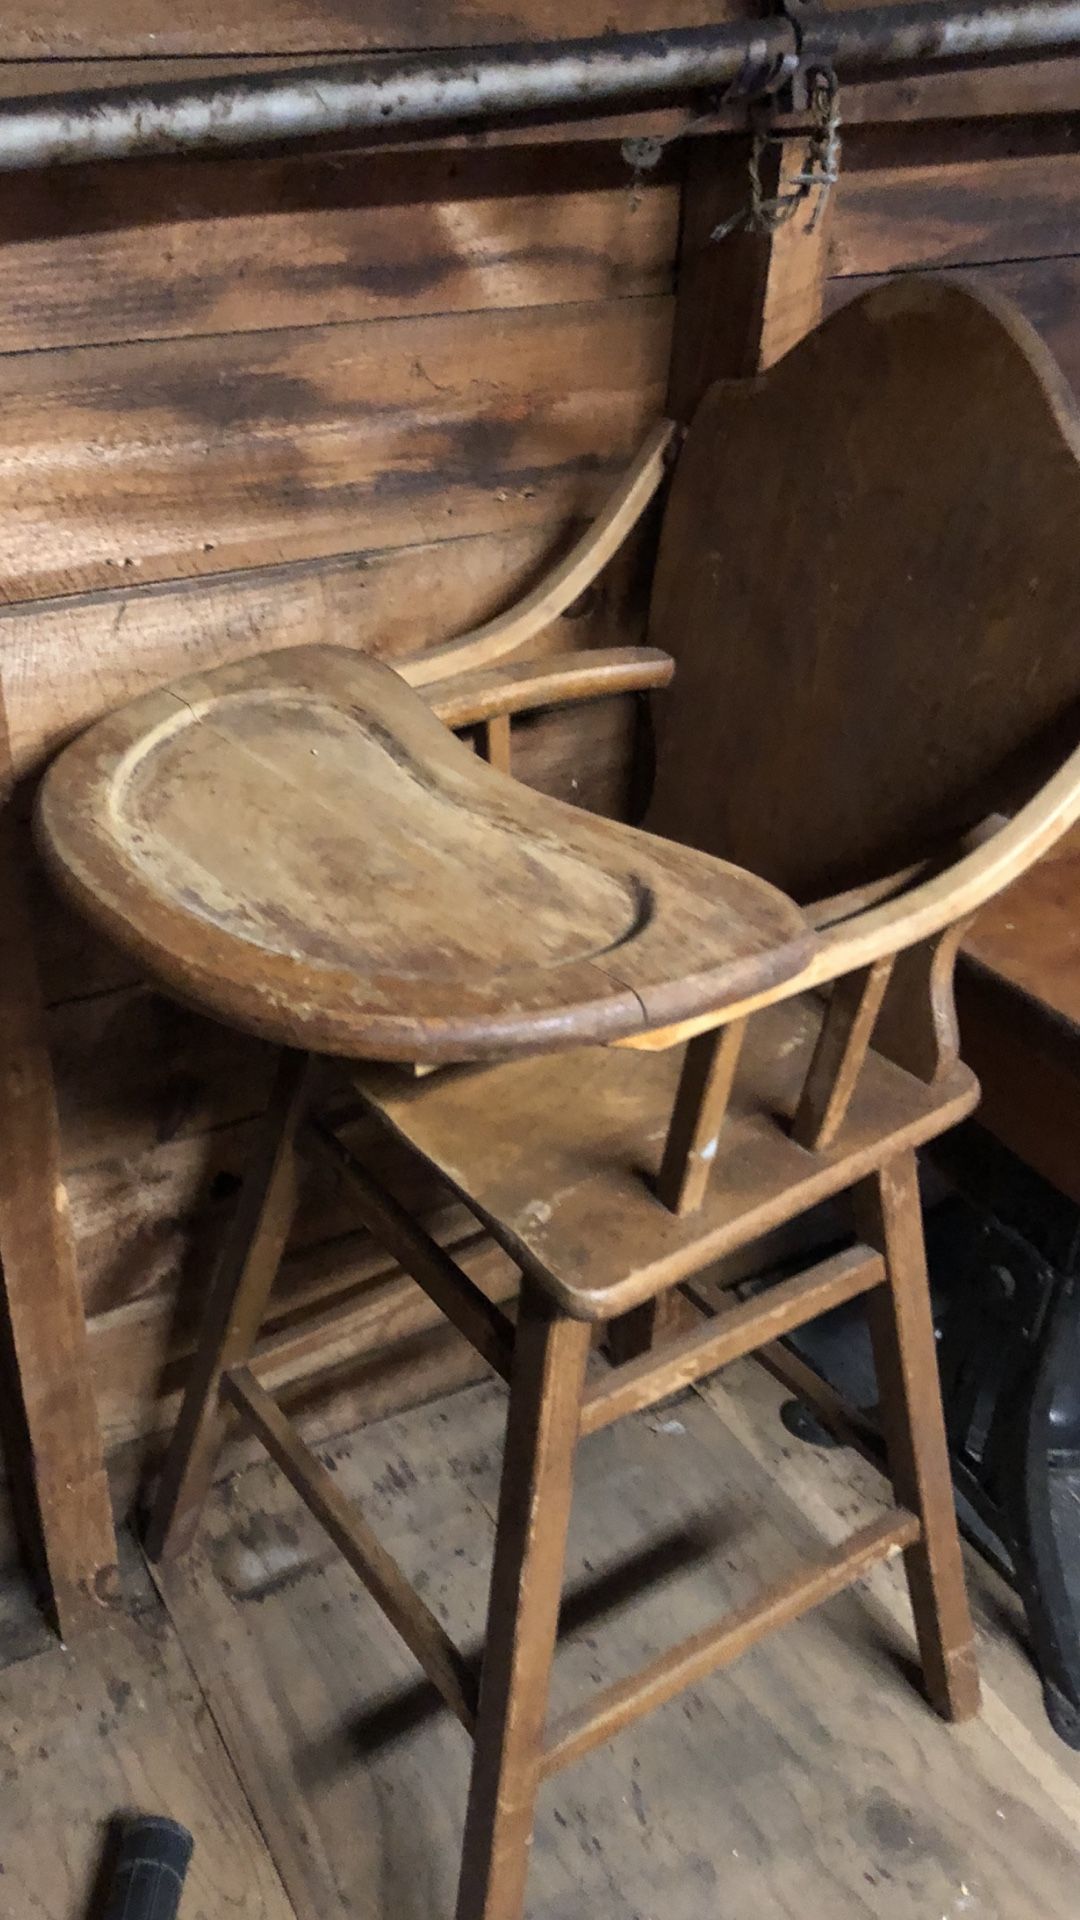 Old Wooden High Chair